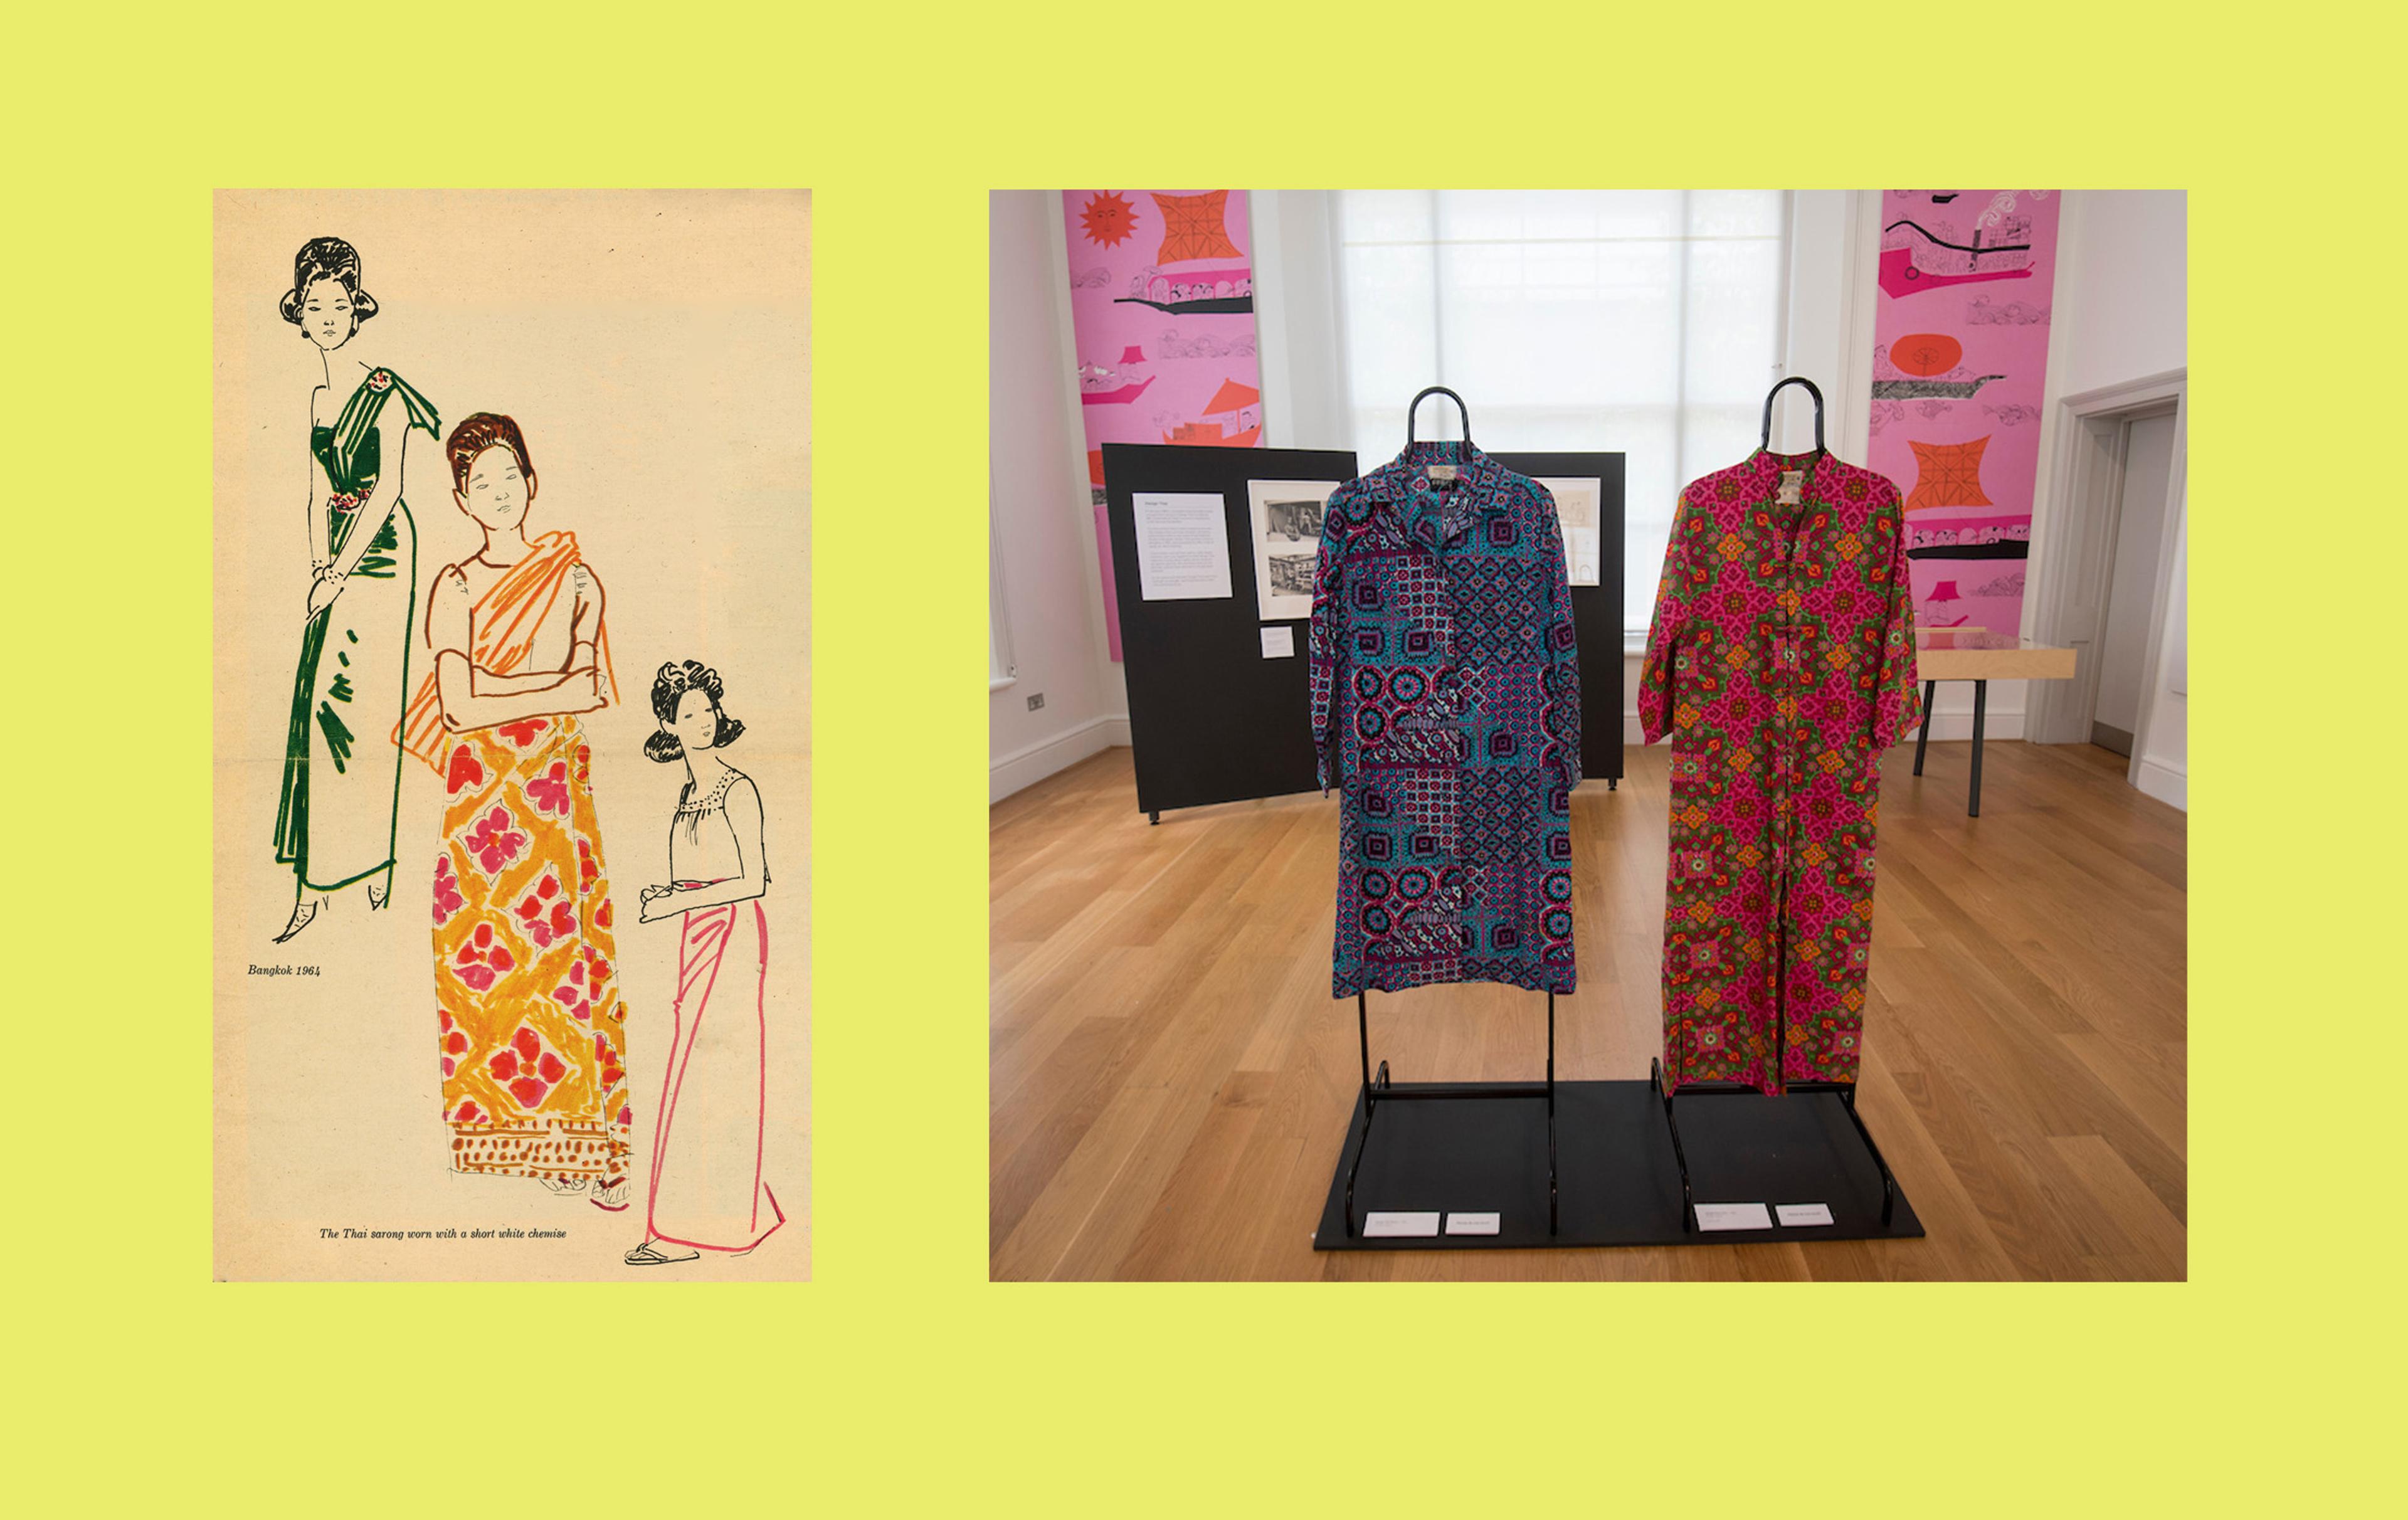 Newspaper cutting with illustration of three people wearing Thai garments, and photograph of a gallery space with a blue dress and a pink and orange tunic on metal frames.